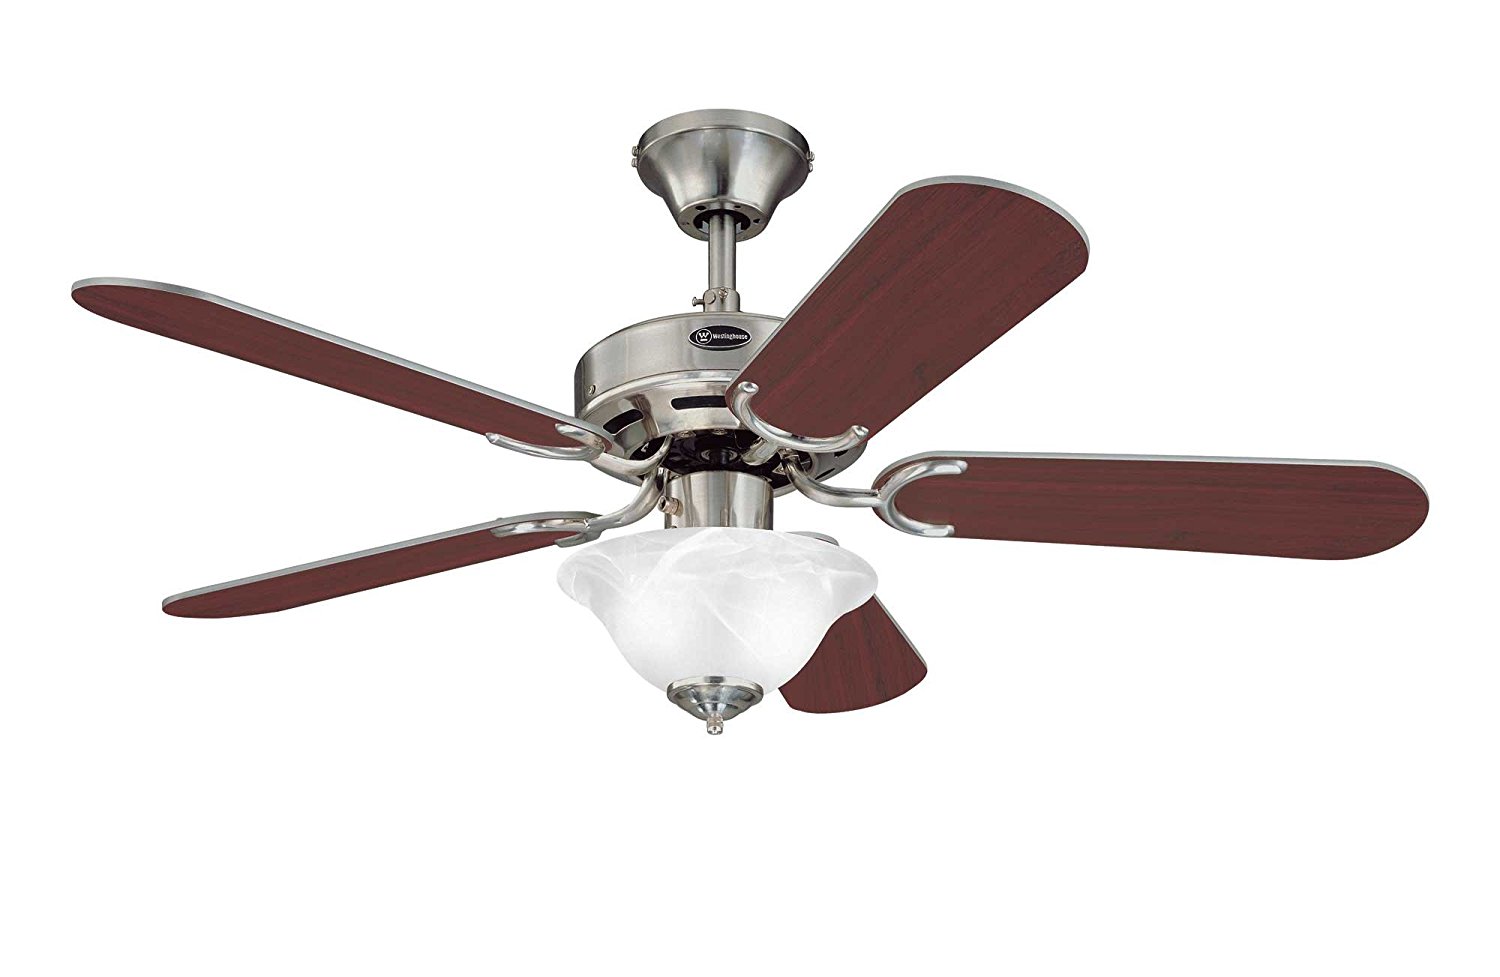 Westinghouse 7877365 Richboro SE Two-Light 42-Inch Reversible Five-Blade Indoor Ceiling Fan, Brushed Nickel with Frosted White Alabaster Glass Bowl